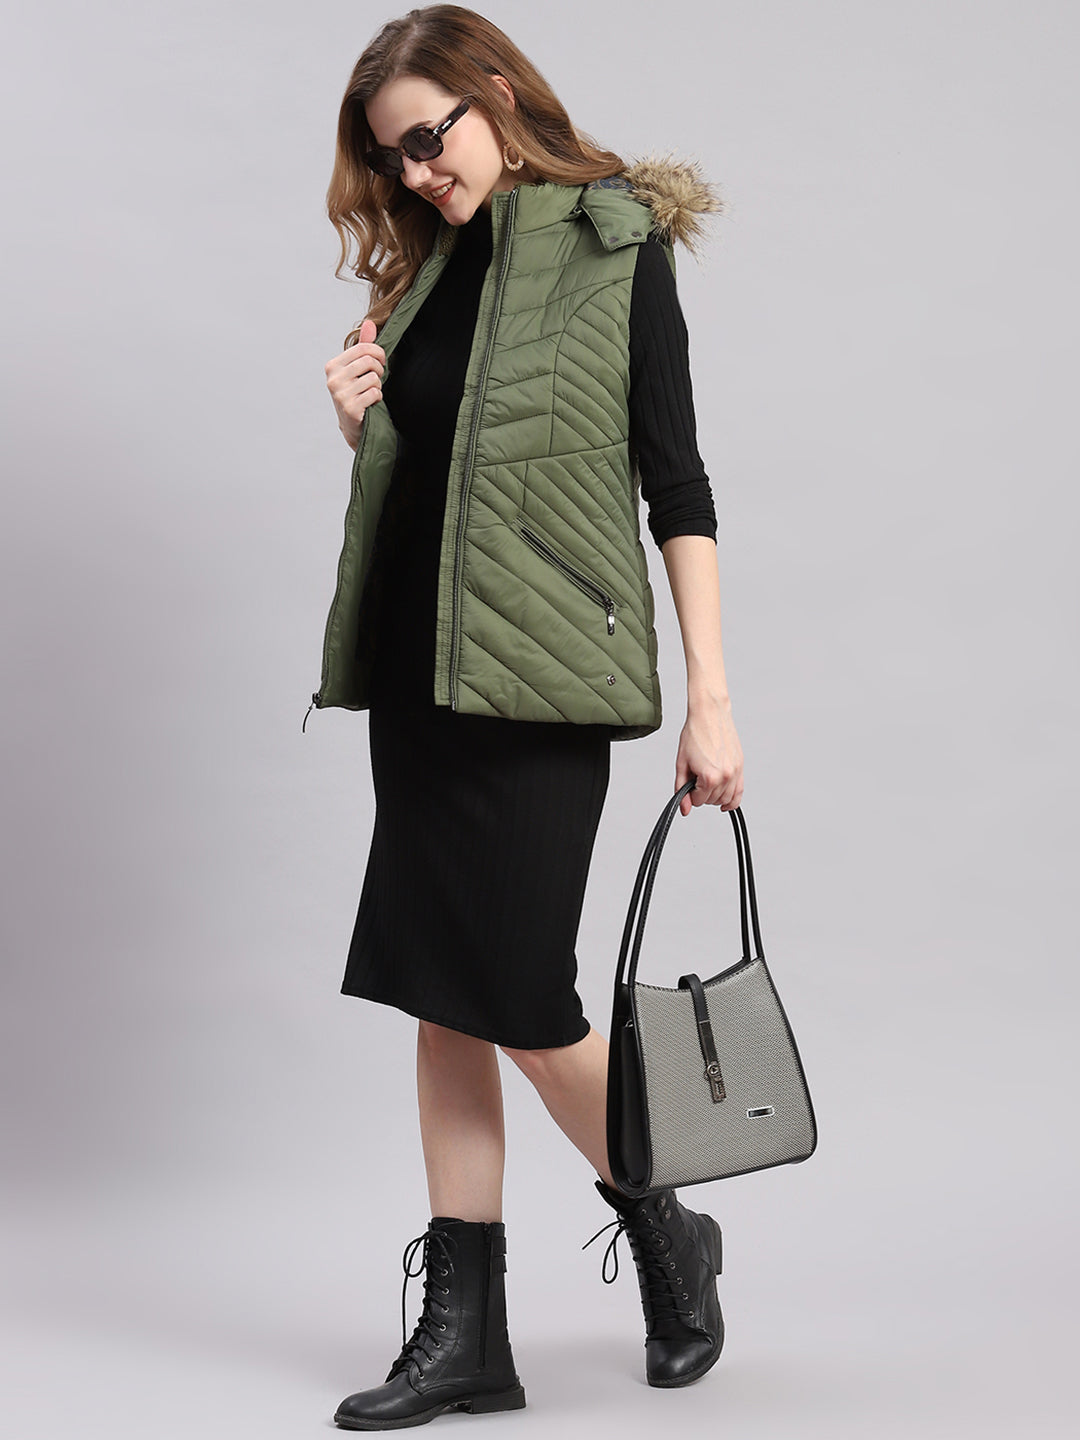 Women Olive Solid Hooded Sleeveless Jackets